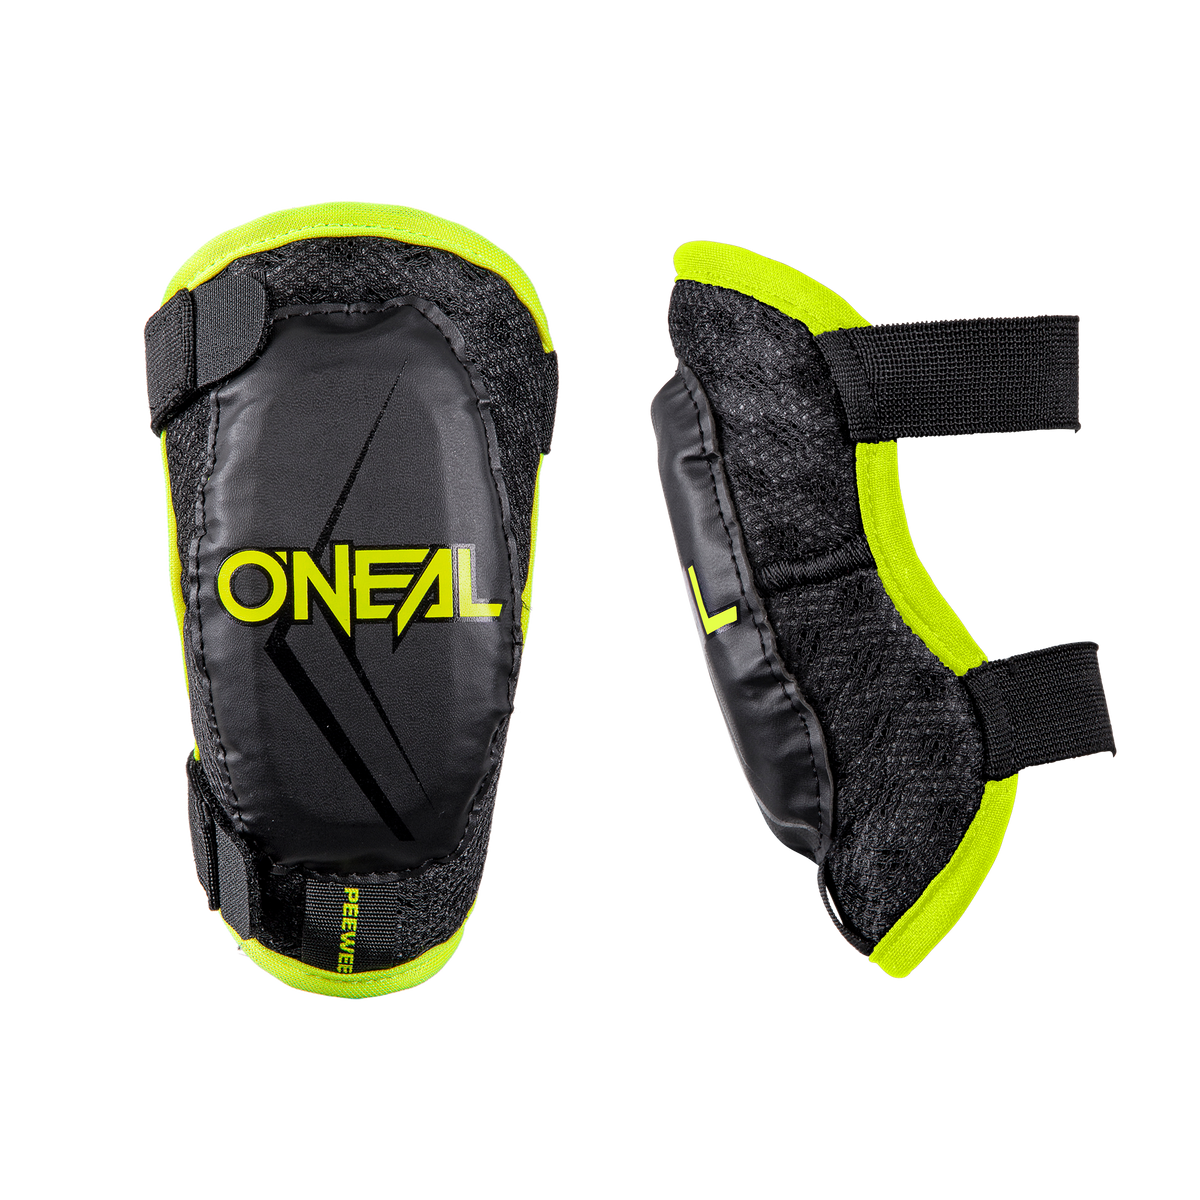 https://cdn.oneal.eu/assets/importedProductImages/PROTECTION/YOUTH/ELBOW/PEEWEE/neon%20yellow/2019_ONeal_PEEWEE_Elbow_Guard_neon%20yellow_front.png